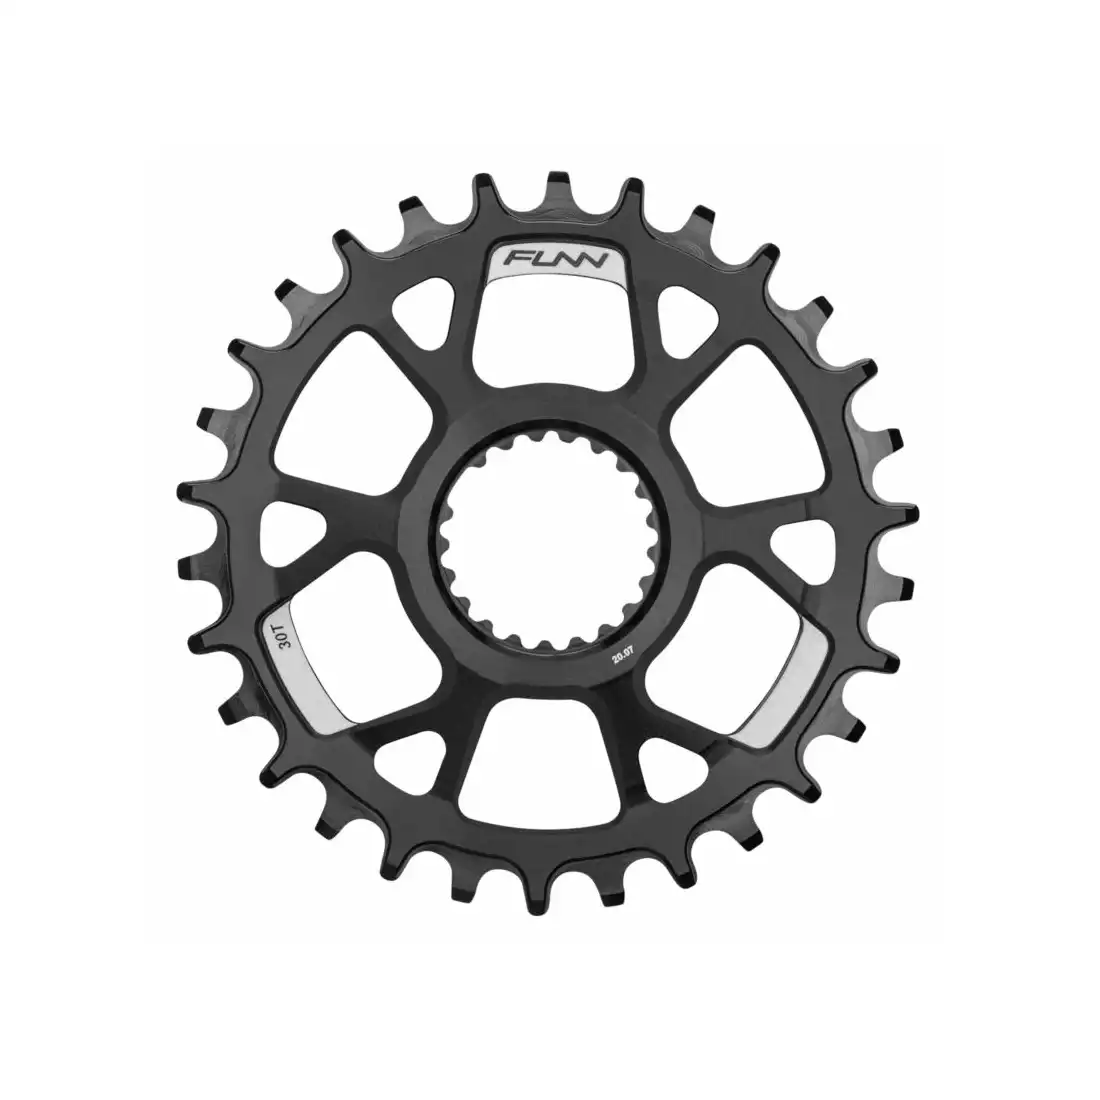 FUNN SOLO DS NARROW-WIDE 34T sprocket for bicycle crank czarna